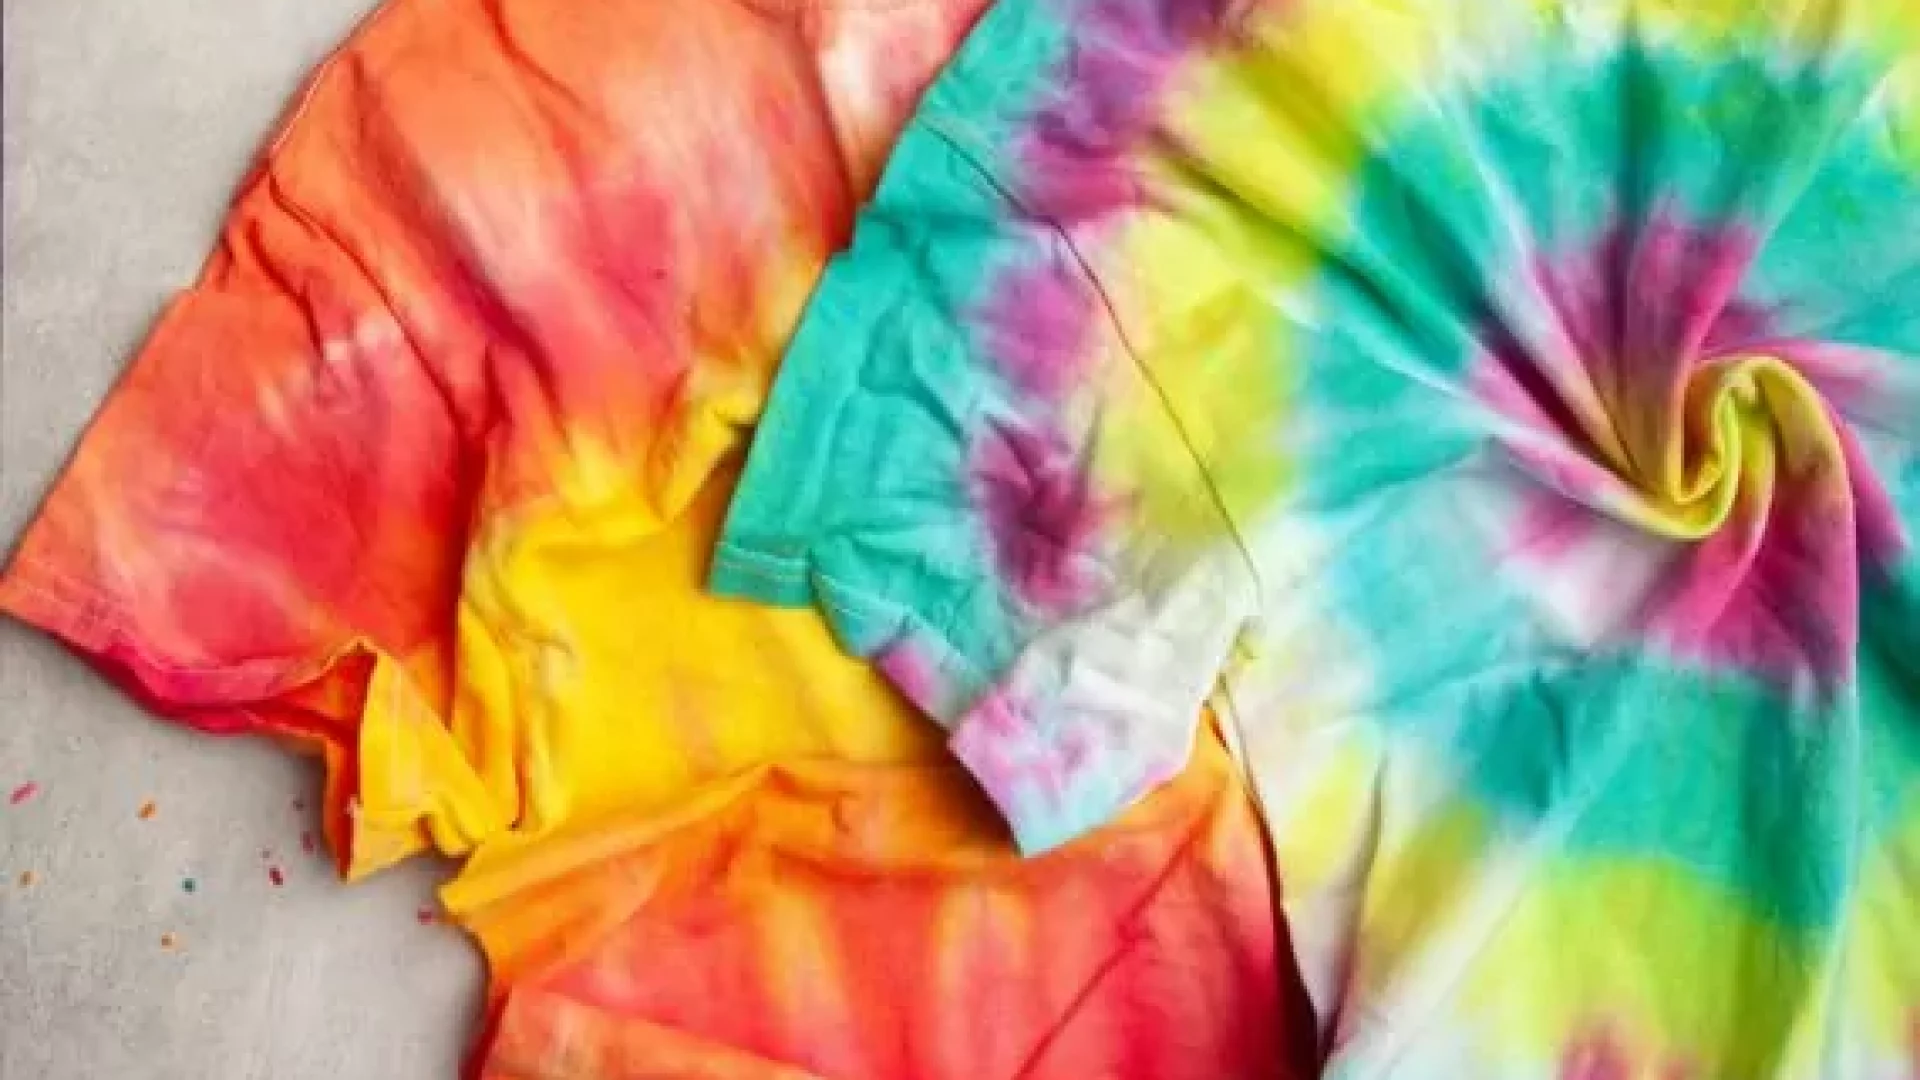 Two Kids Tie-Dye Party - San Diego Area shirts on a table.